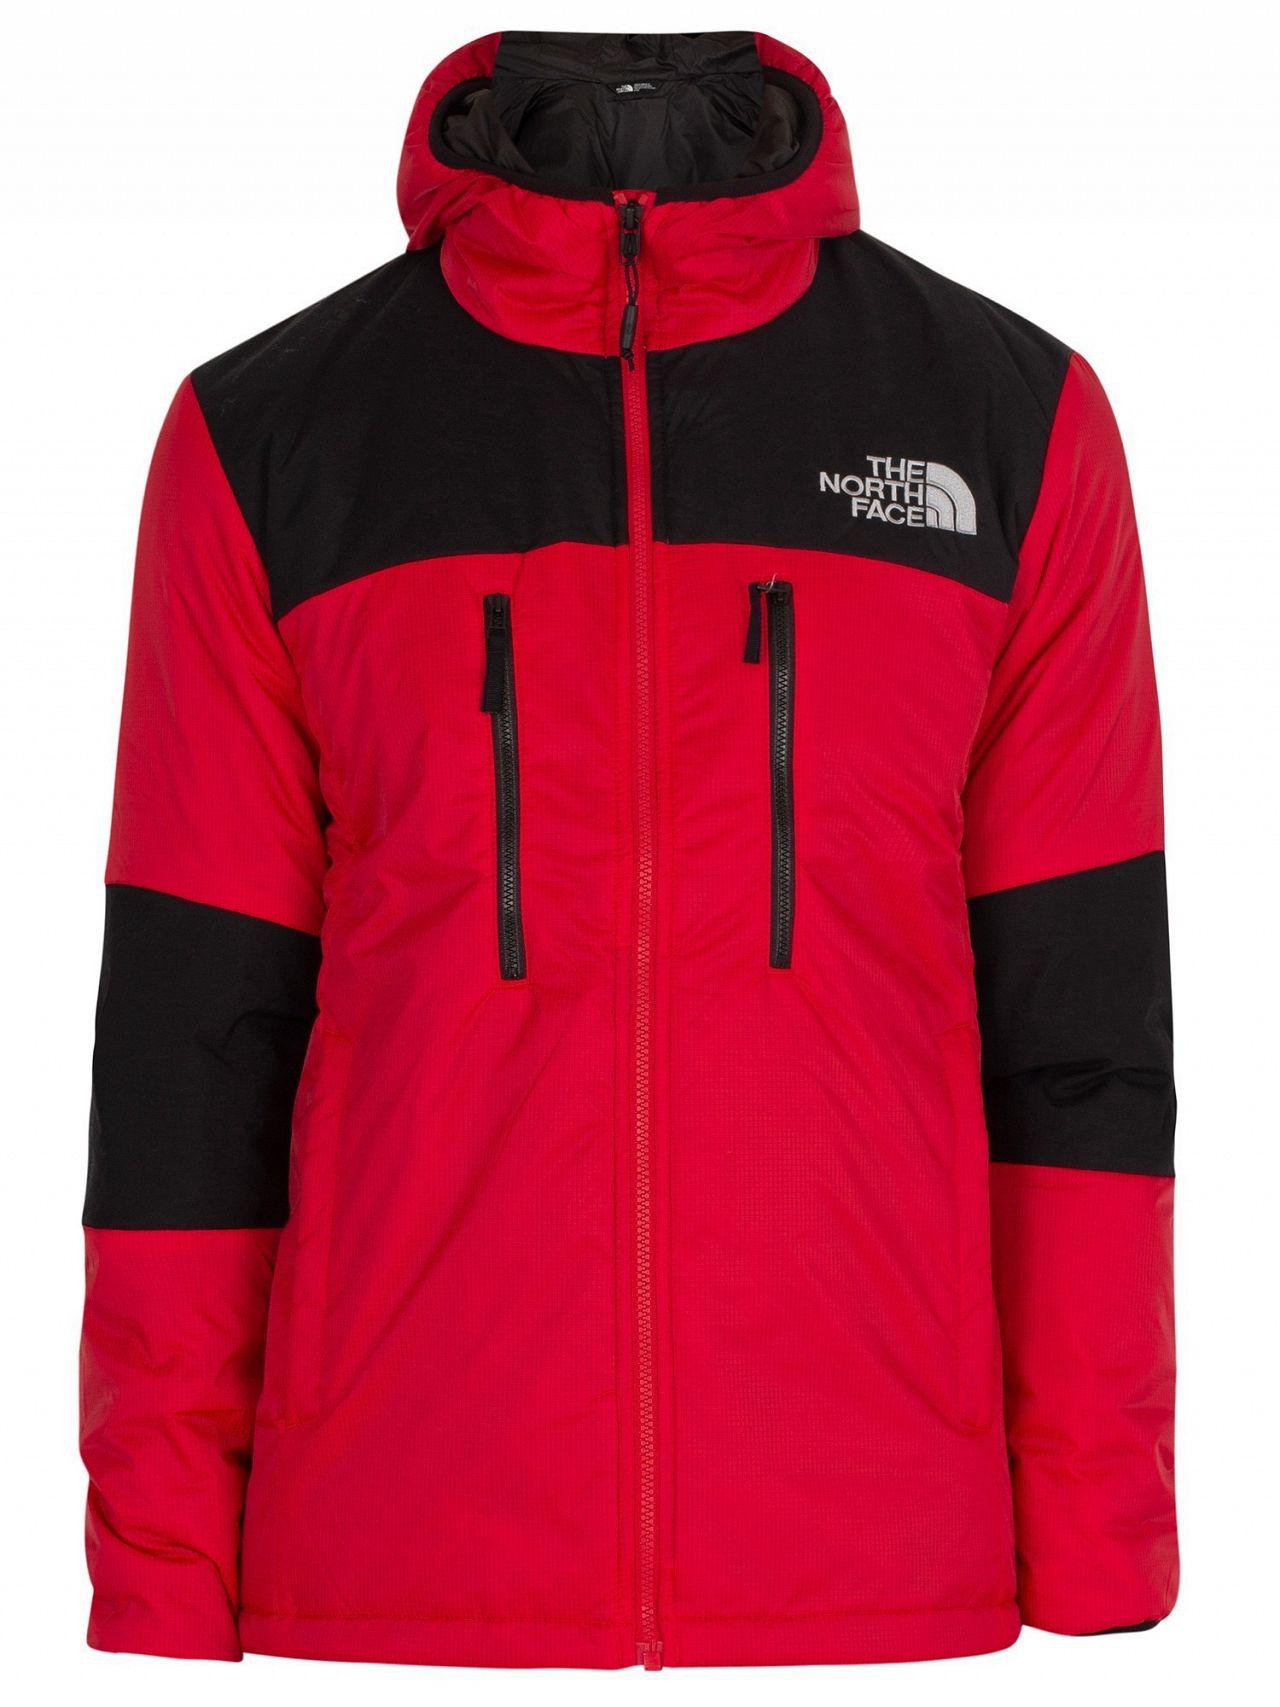 The North Face Men's Himalayan Light Synthetic Jacket, Red Men's Jacket ...